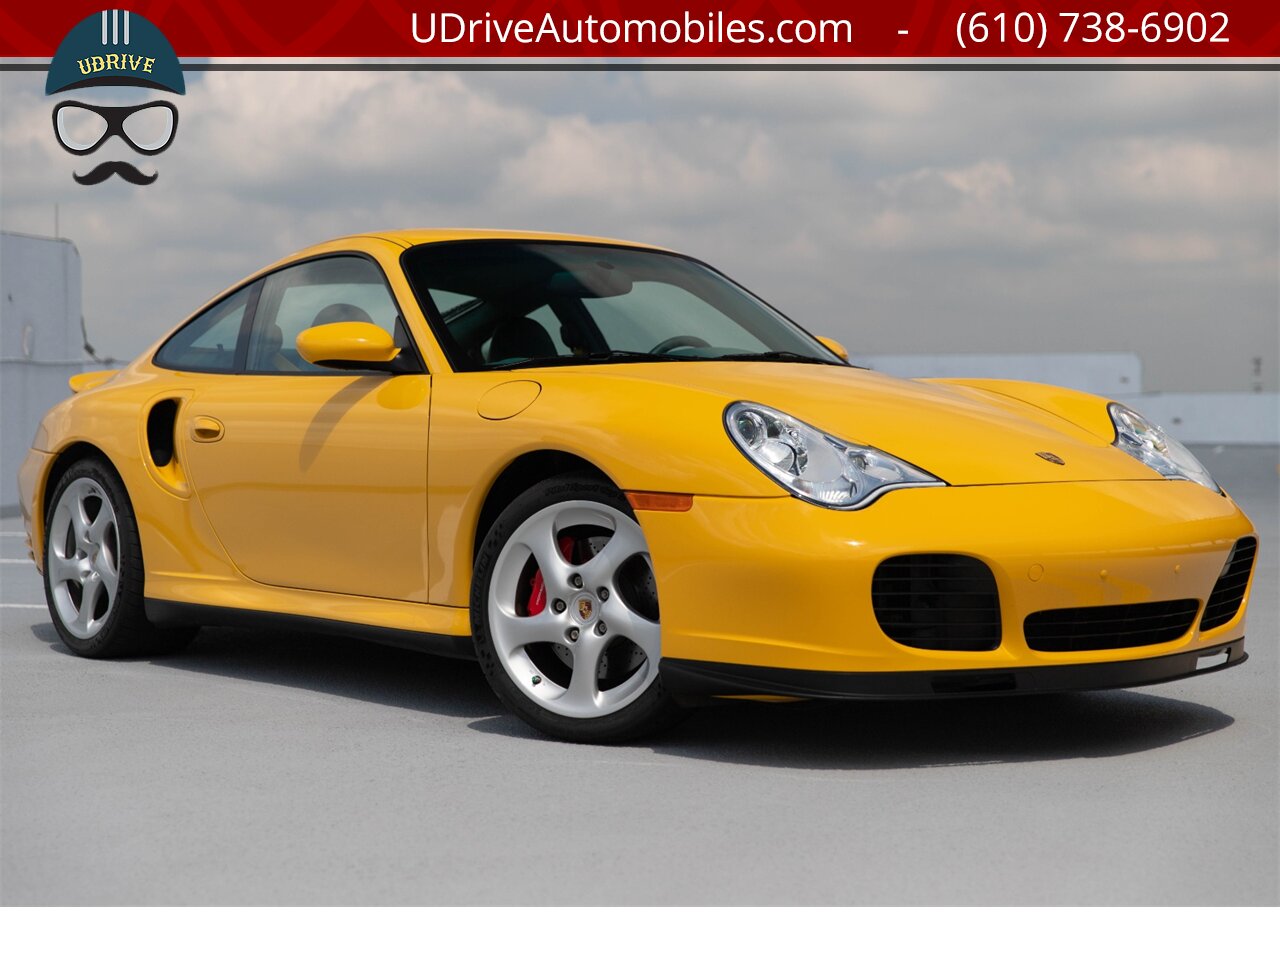 2003 Porsche 911 996 Turbo X50 6Sp Nephrite Green Lthr 9k Miles  Deviating Yellow Stitching Collector Grade BACK AGAIN - Photo 4 - West Chester, PA 19382